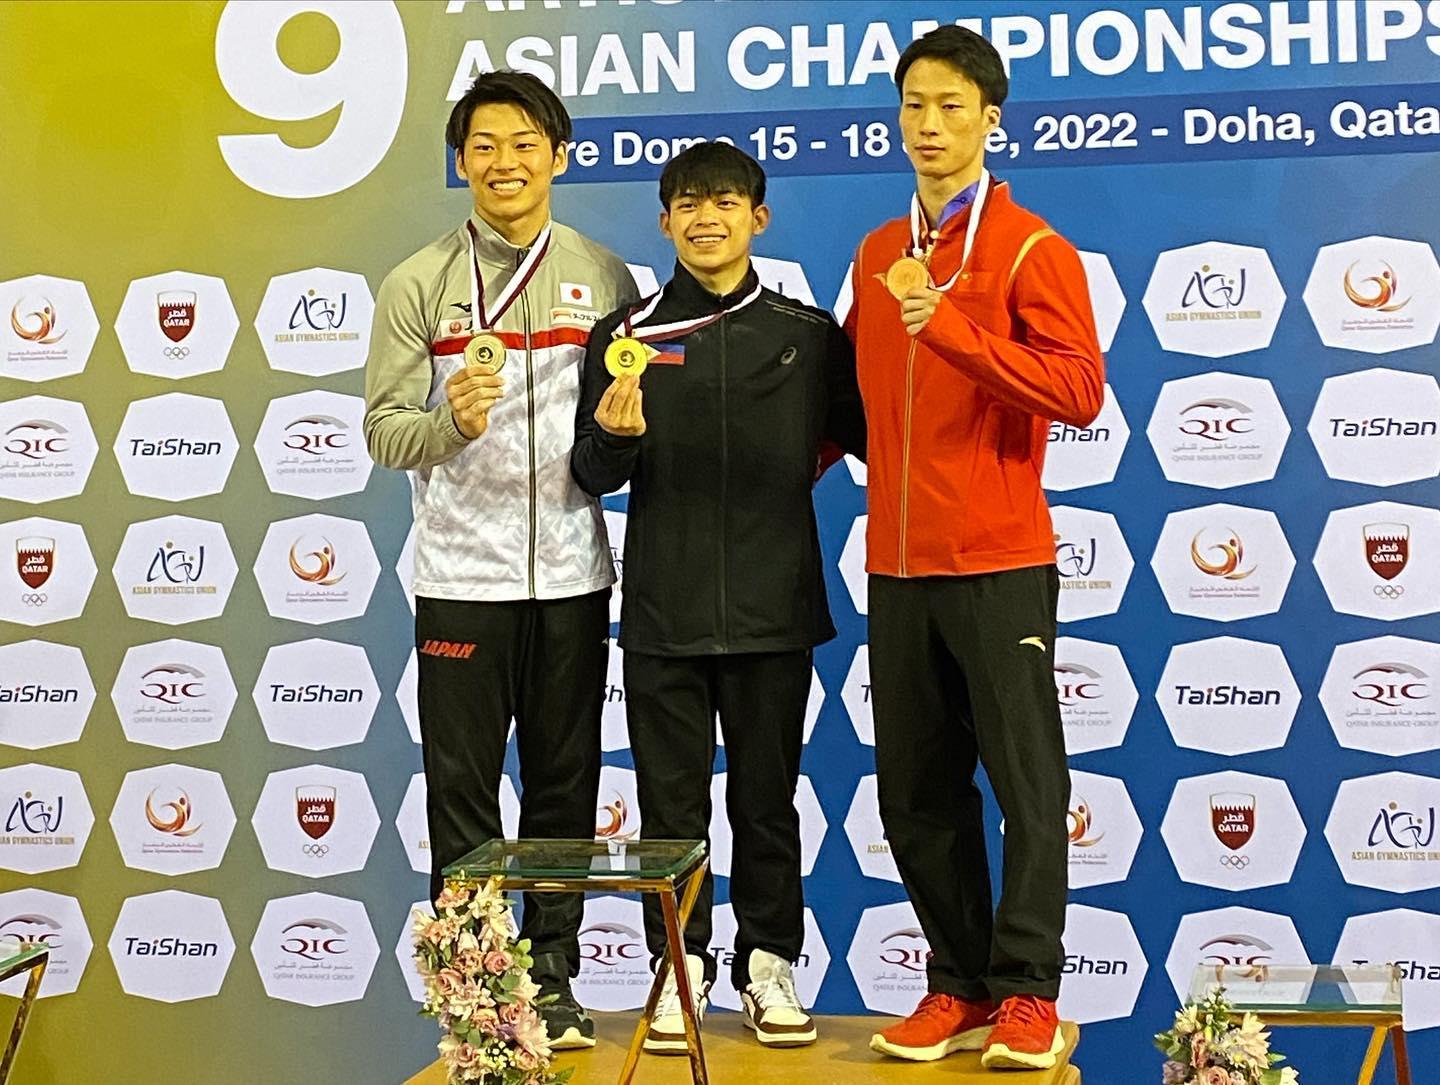 Carlos Yulo gets two more golds in Asian championships GMA News Online